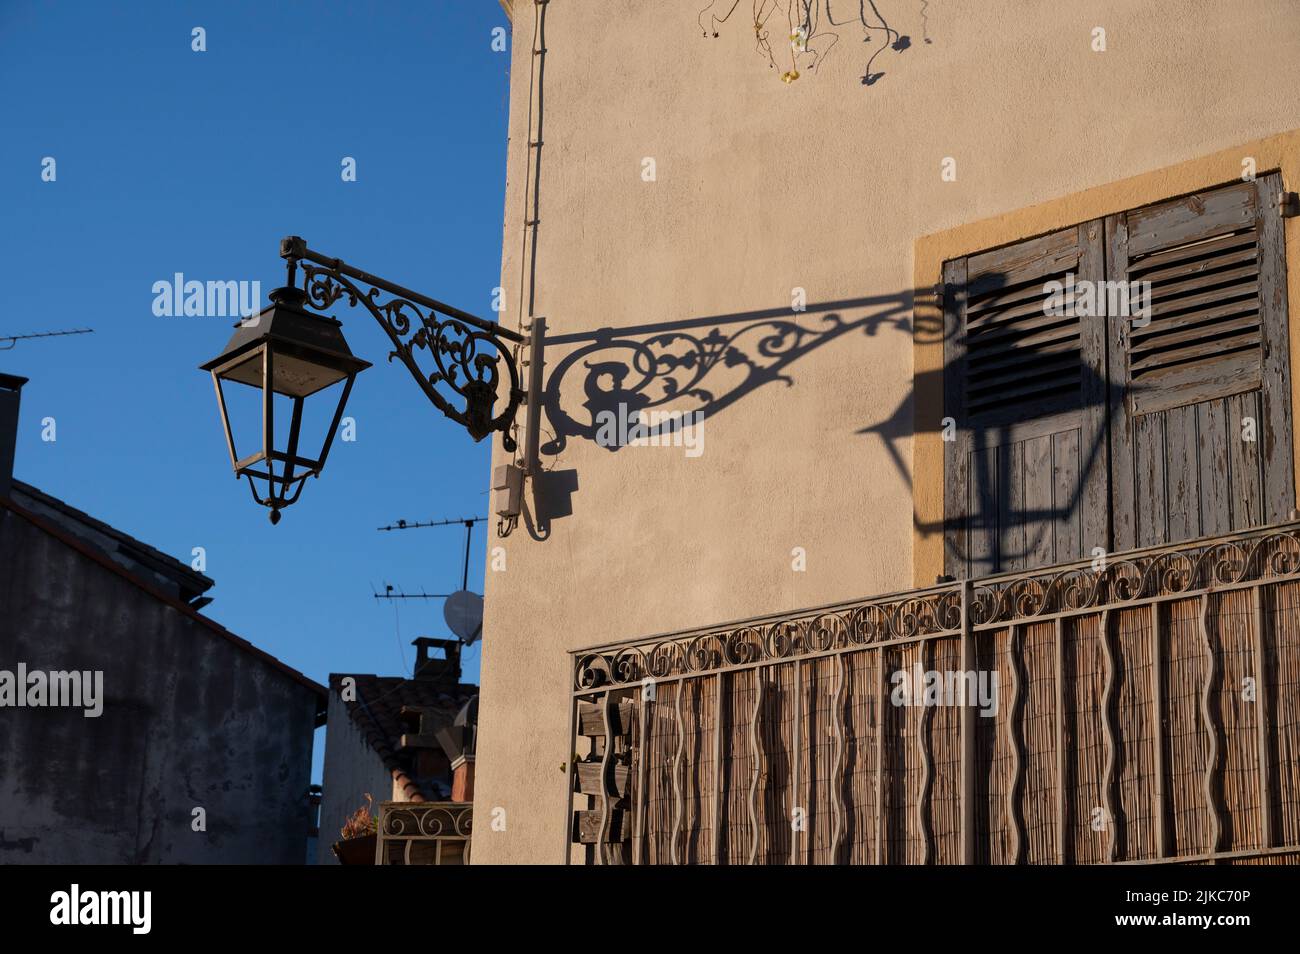 Arles, France. Old wrought iron street lamp Stock Photo